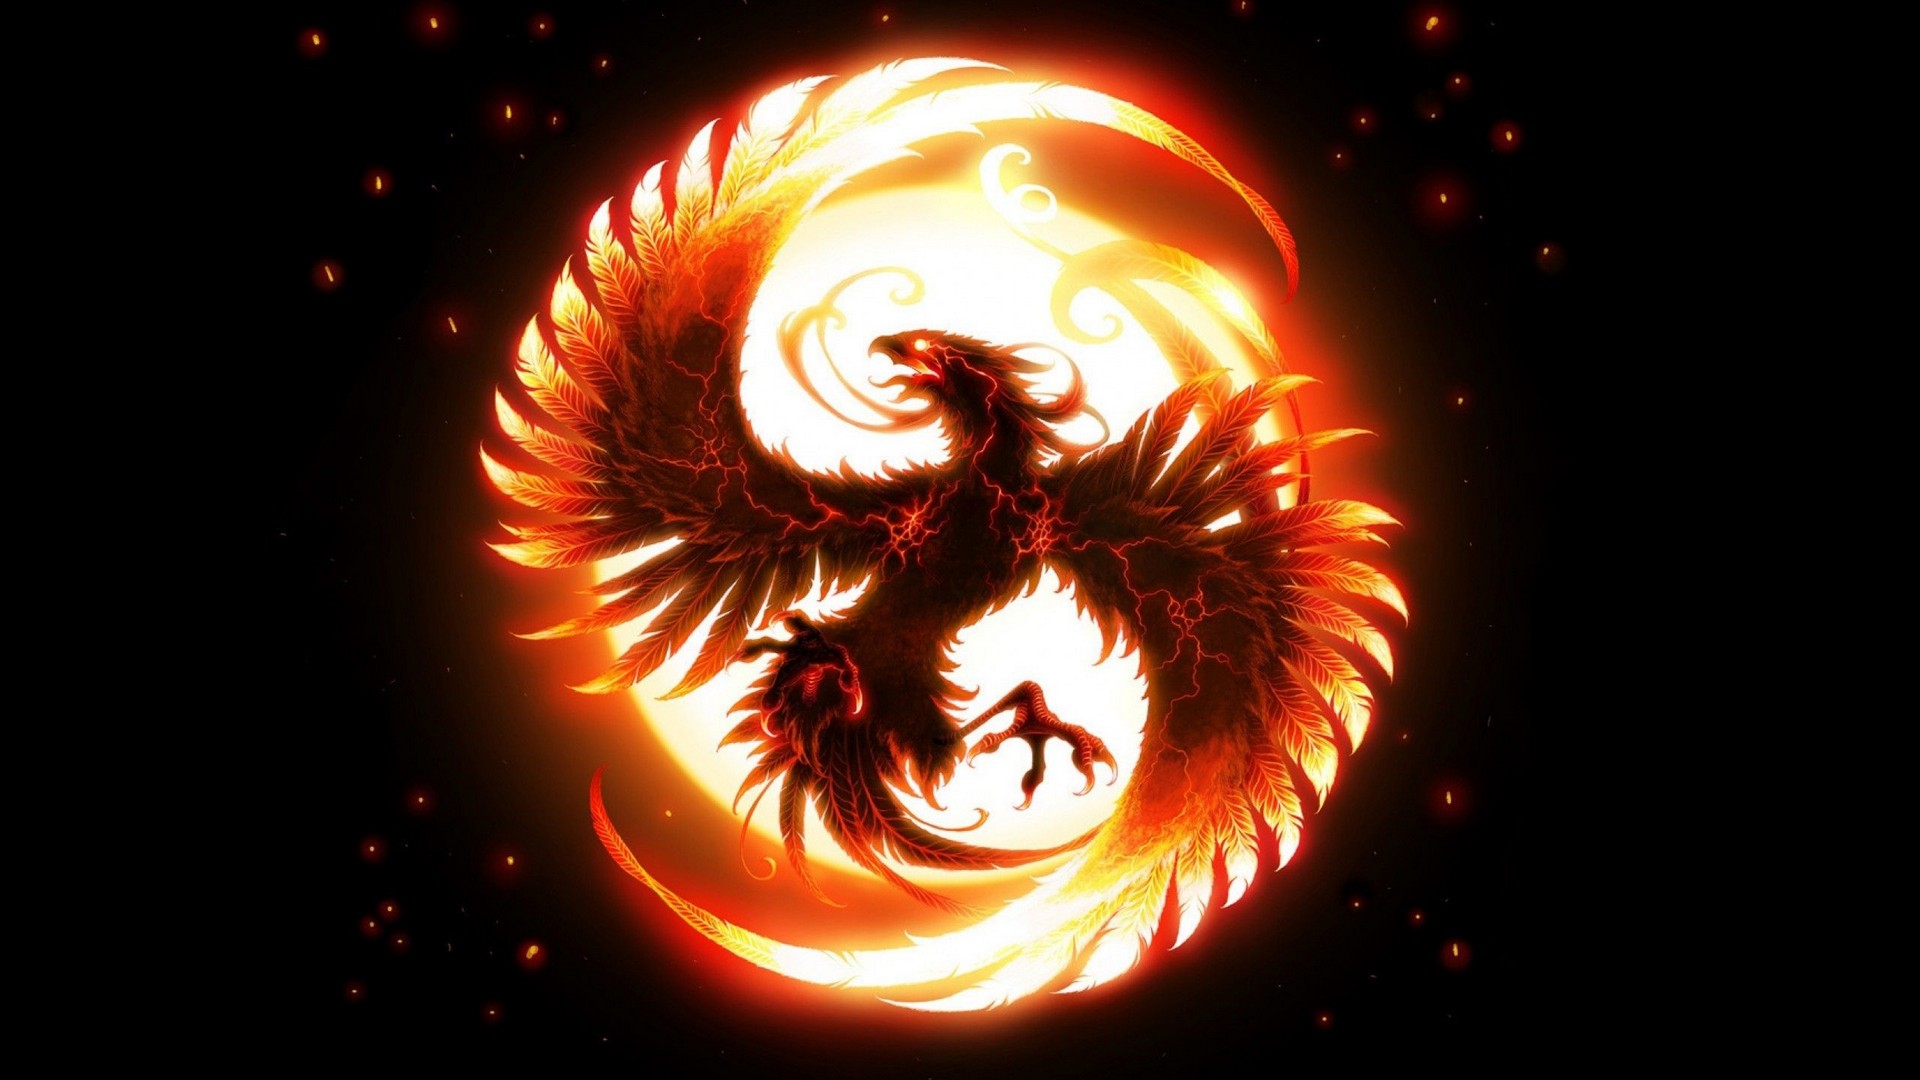 Best Phoenix Bird Wallpaper with resolution 1920X1080 pixel. You can use this wallpaper as background for your desktop Computer Screensavers, Android or iPhone smartphones